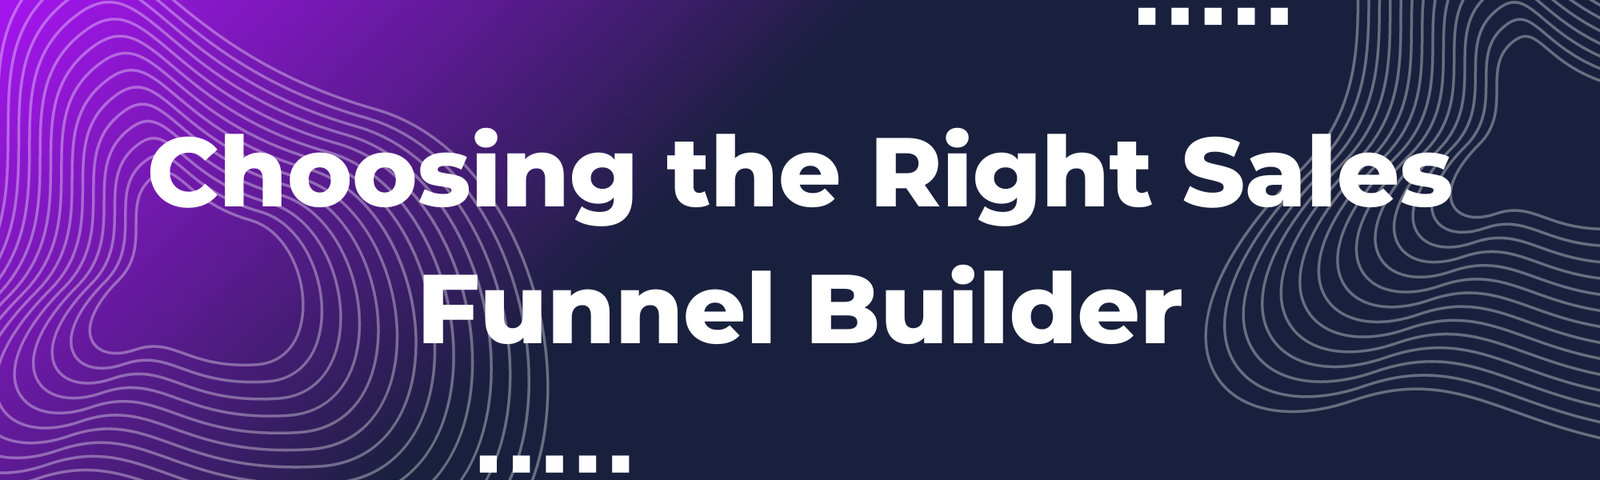 Choosing the Right Sales Funnel Builder